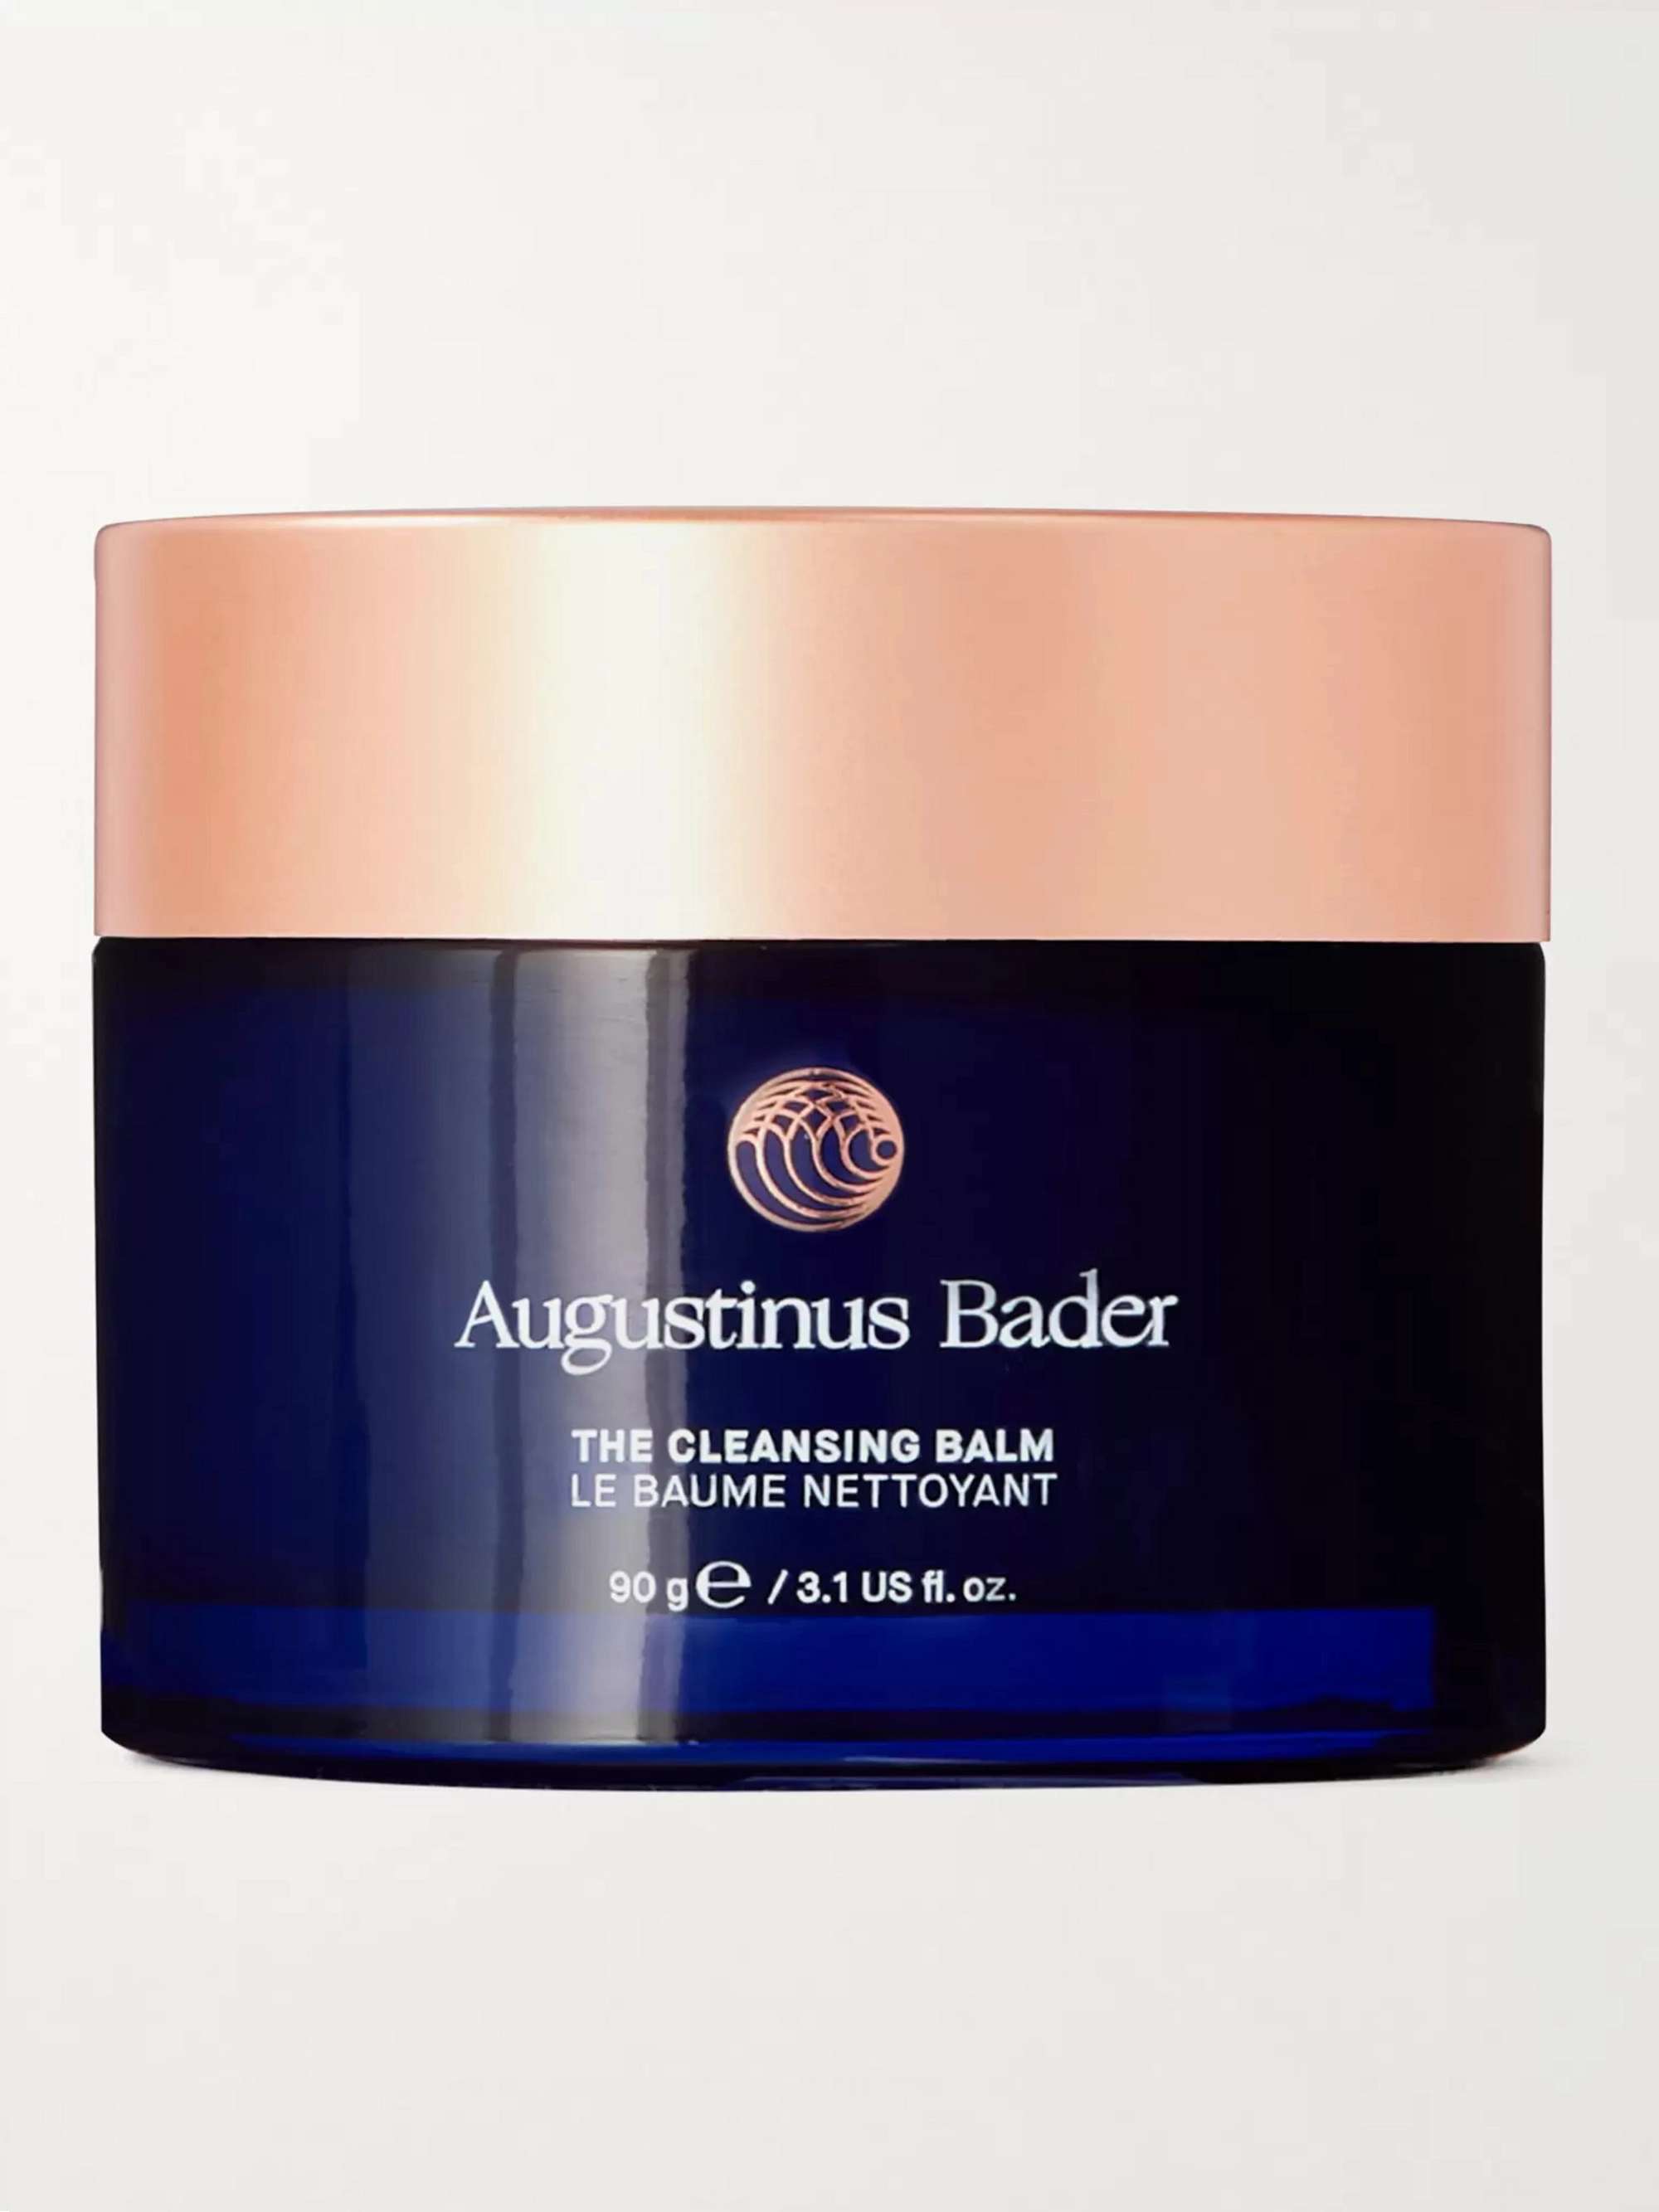 AUGUSTINUS BADER The Cleansing Balm, 90g